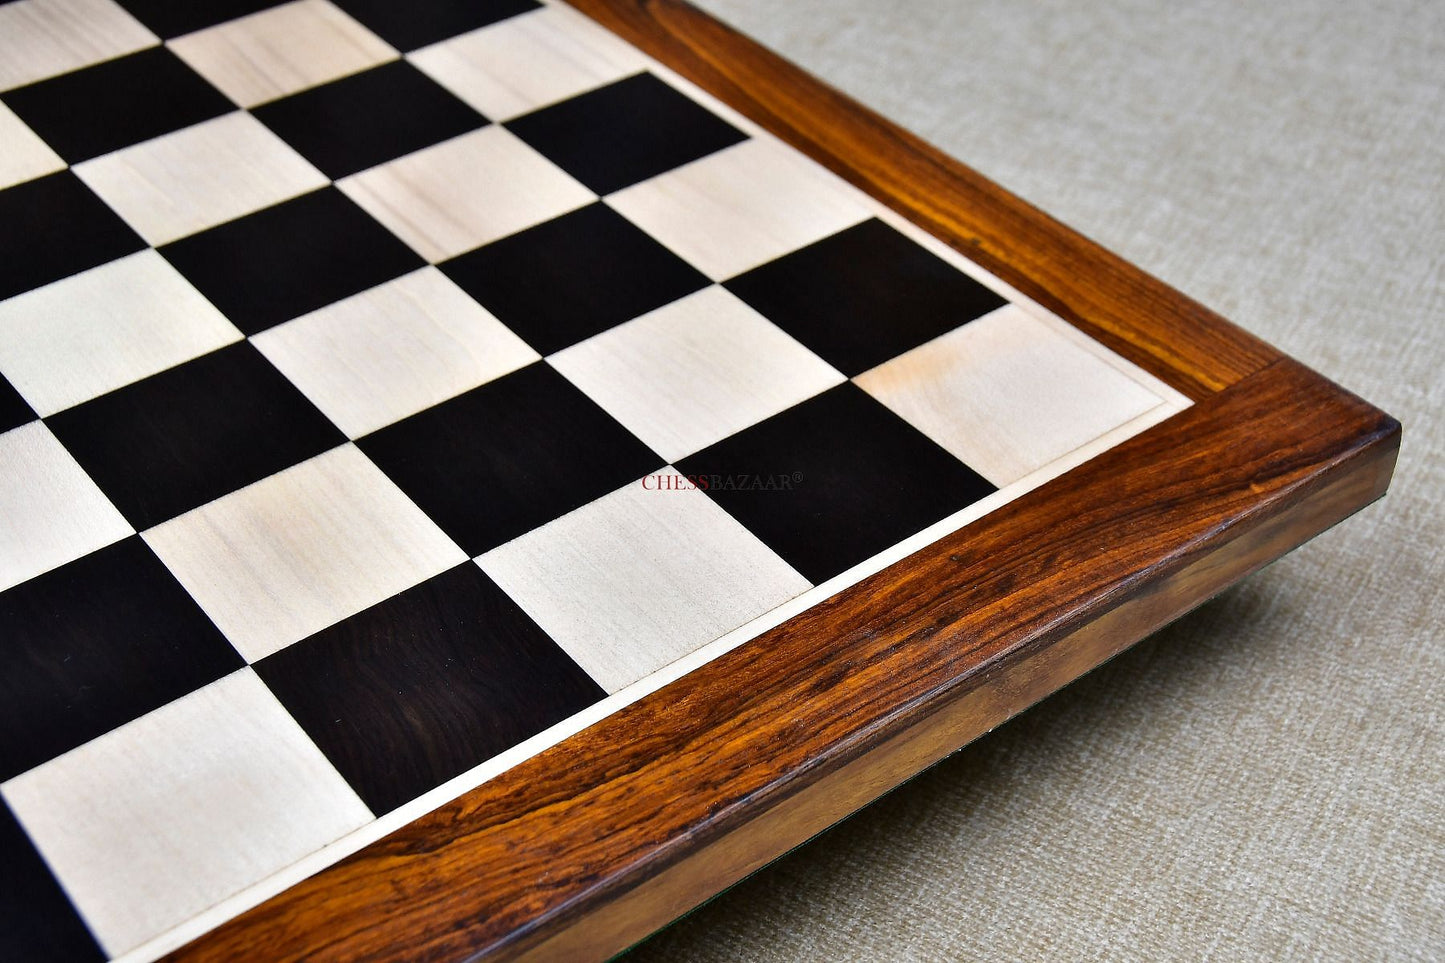 Solid Wooden Indian Chess Board in Genuine Ebony Wood & Maple Wood with Sheesham Wood Border 19" - 50 mm Square